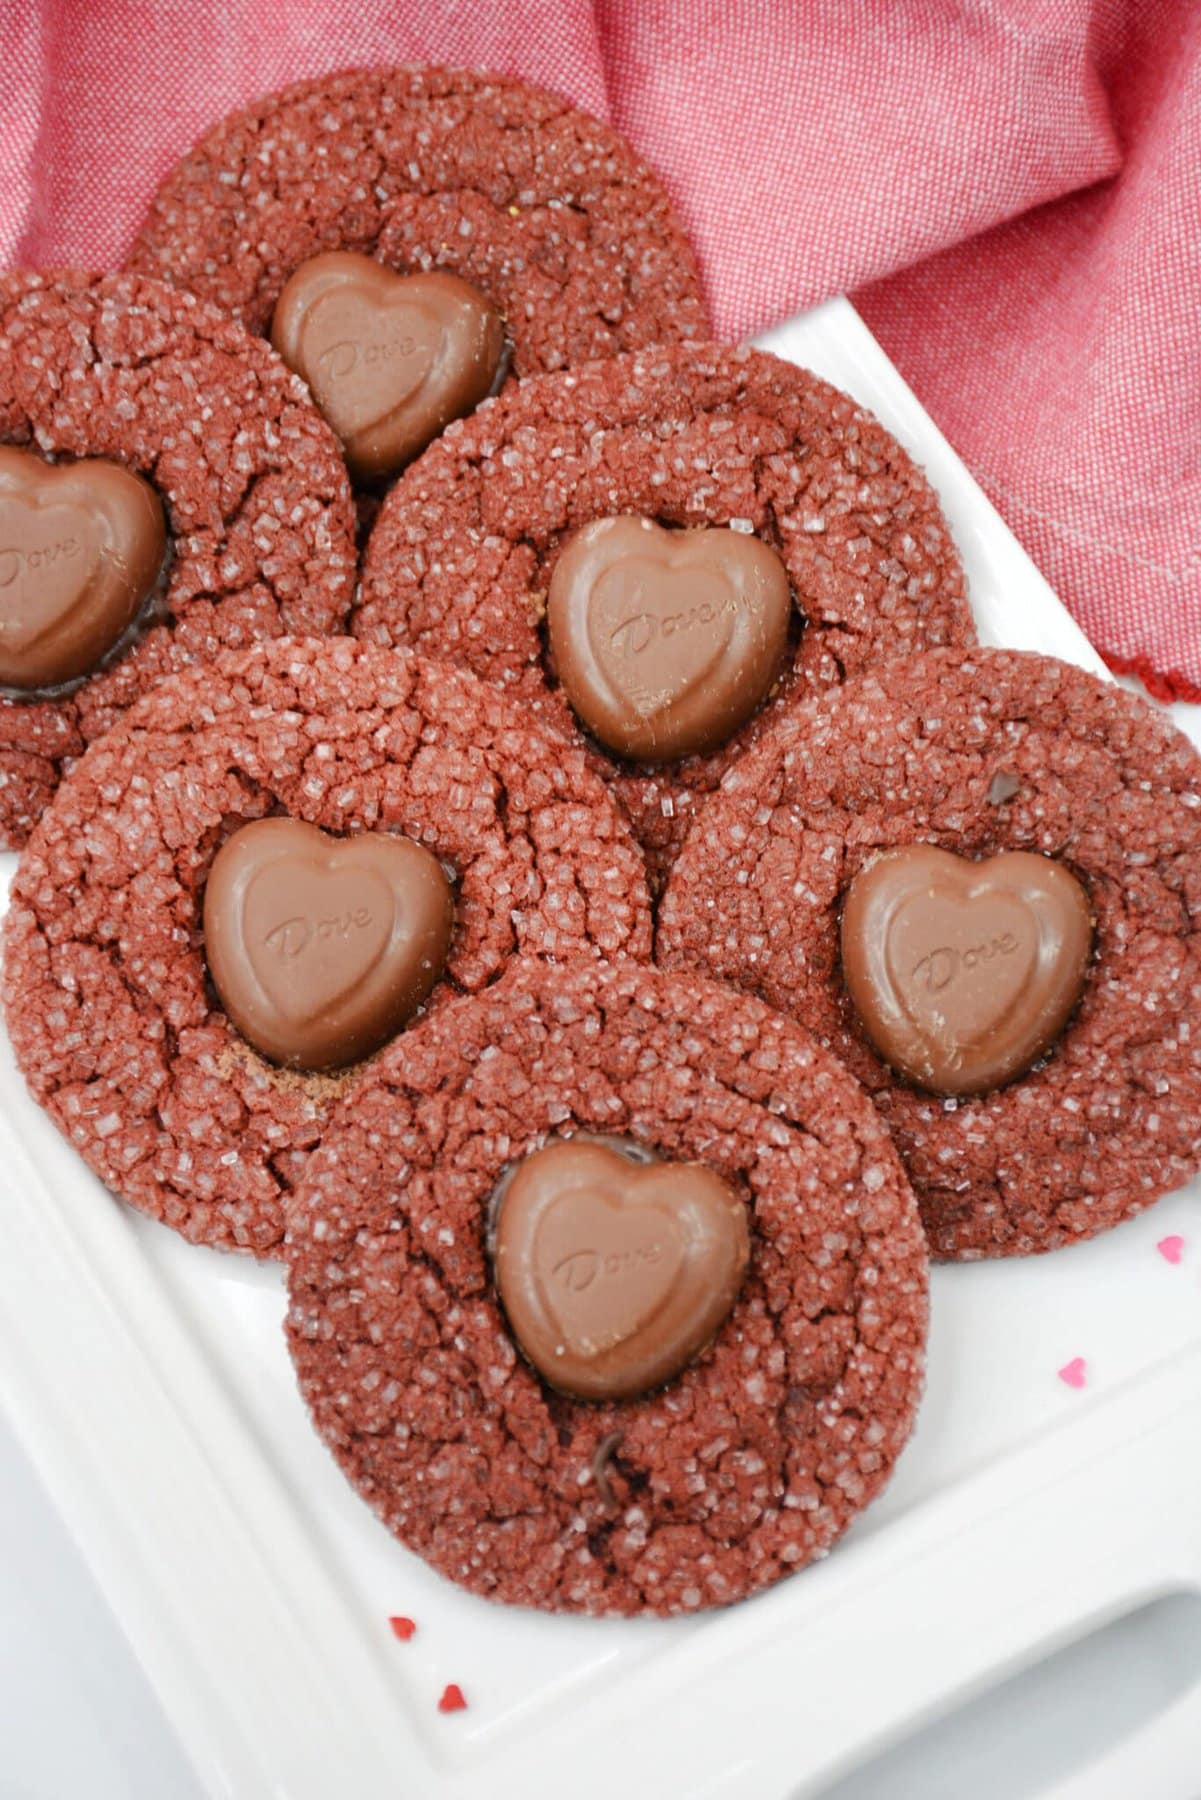 The Red Velvet Cookies with chocolate hearts in the middle.